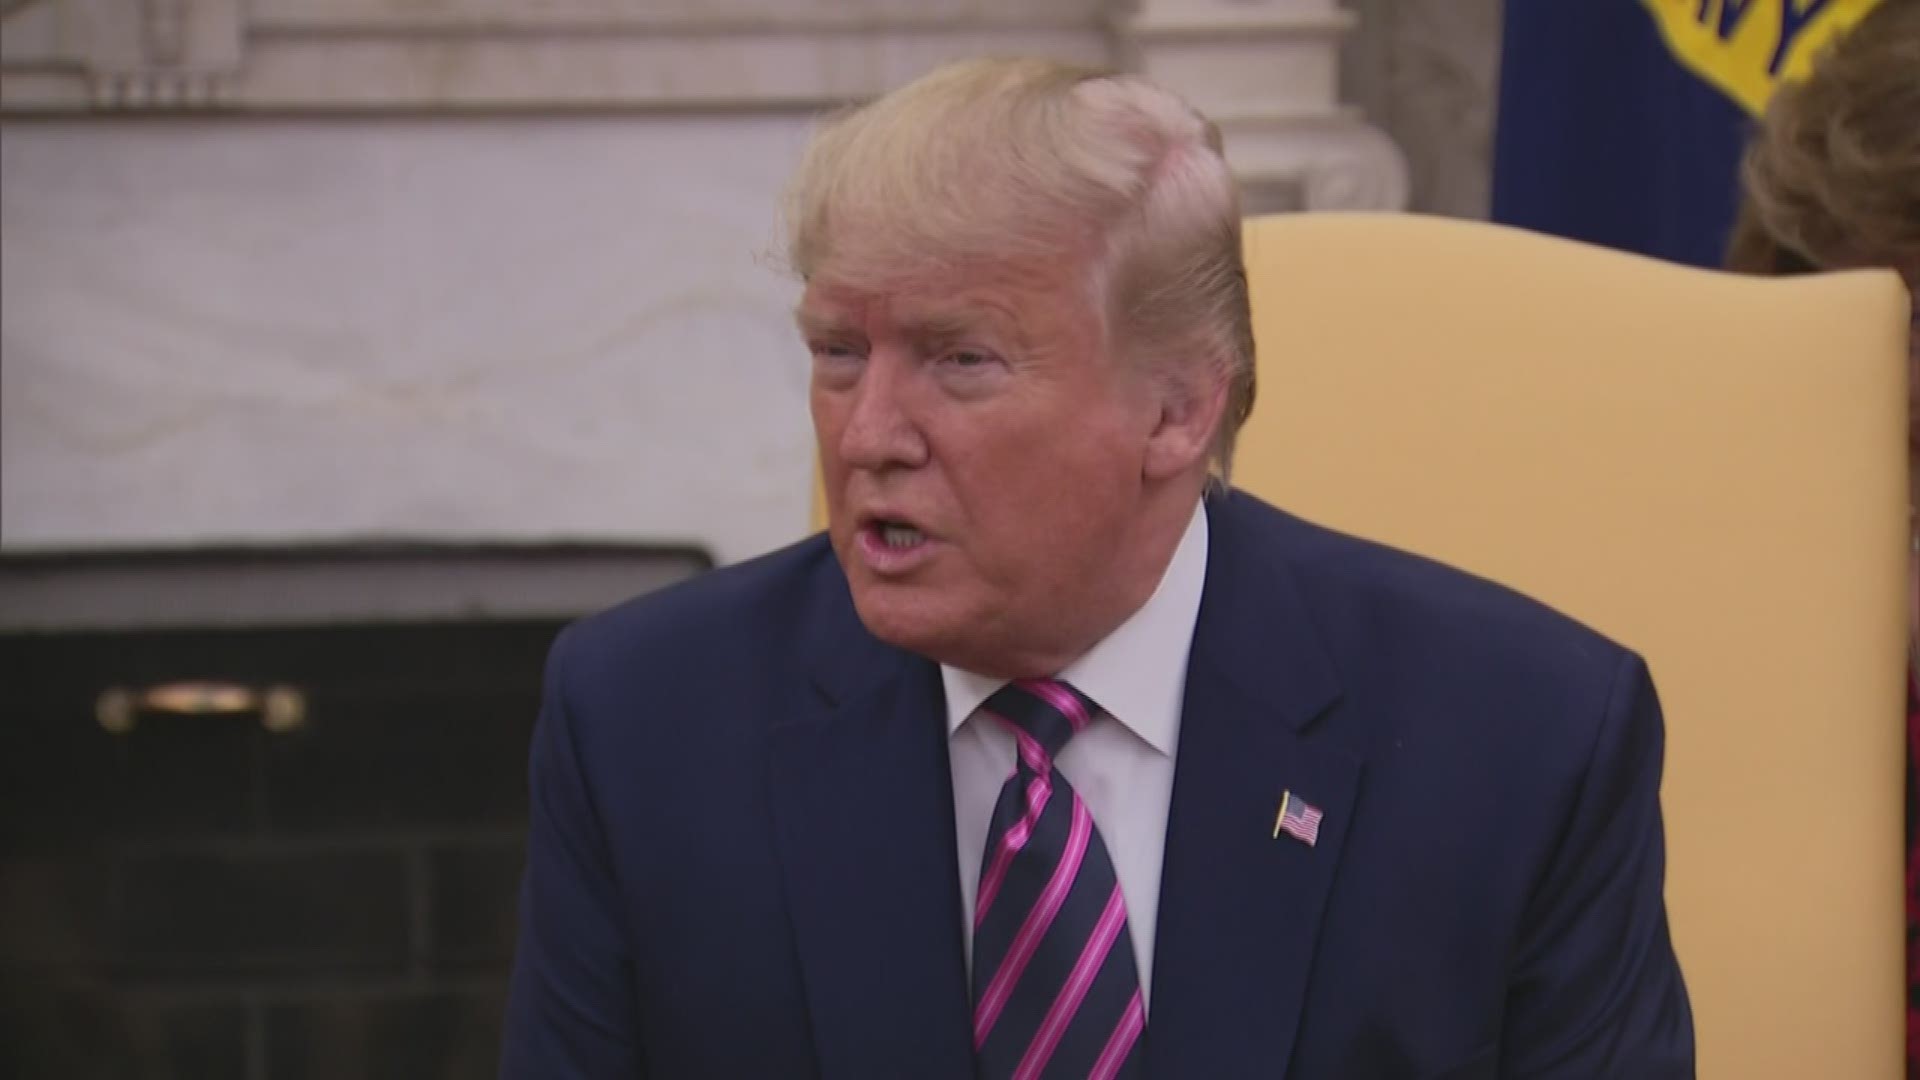 A couple hours after the House Judiciary Committee approved two articles of impeachment against President Donald Trump, the president said it's all a sham.